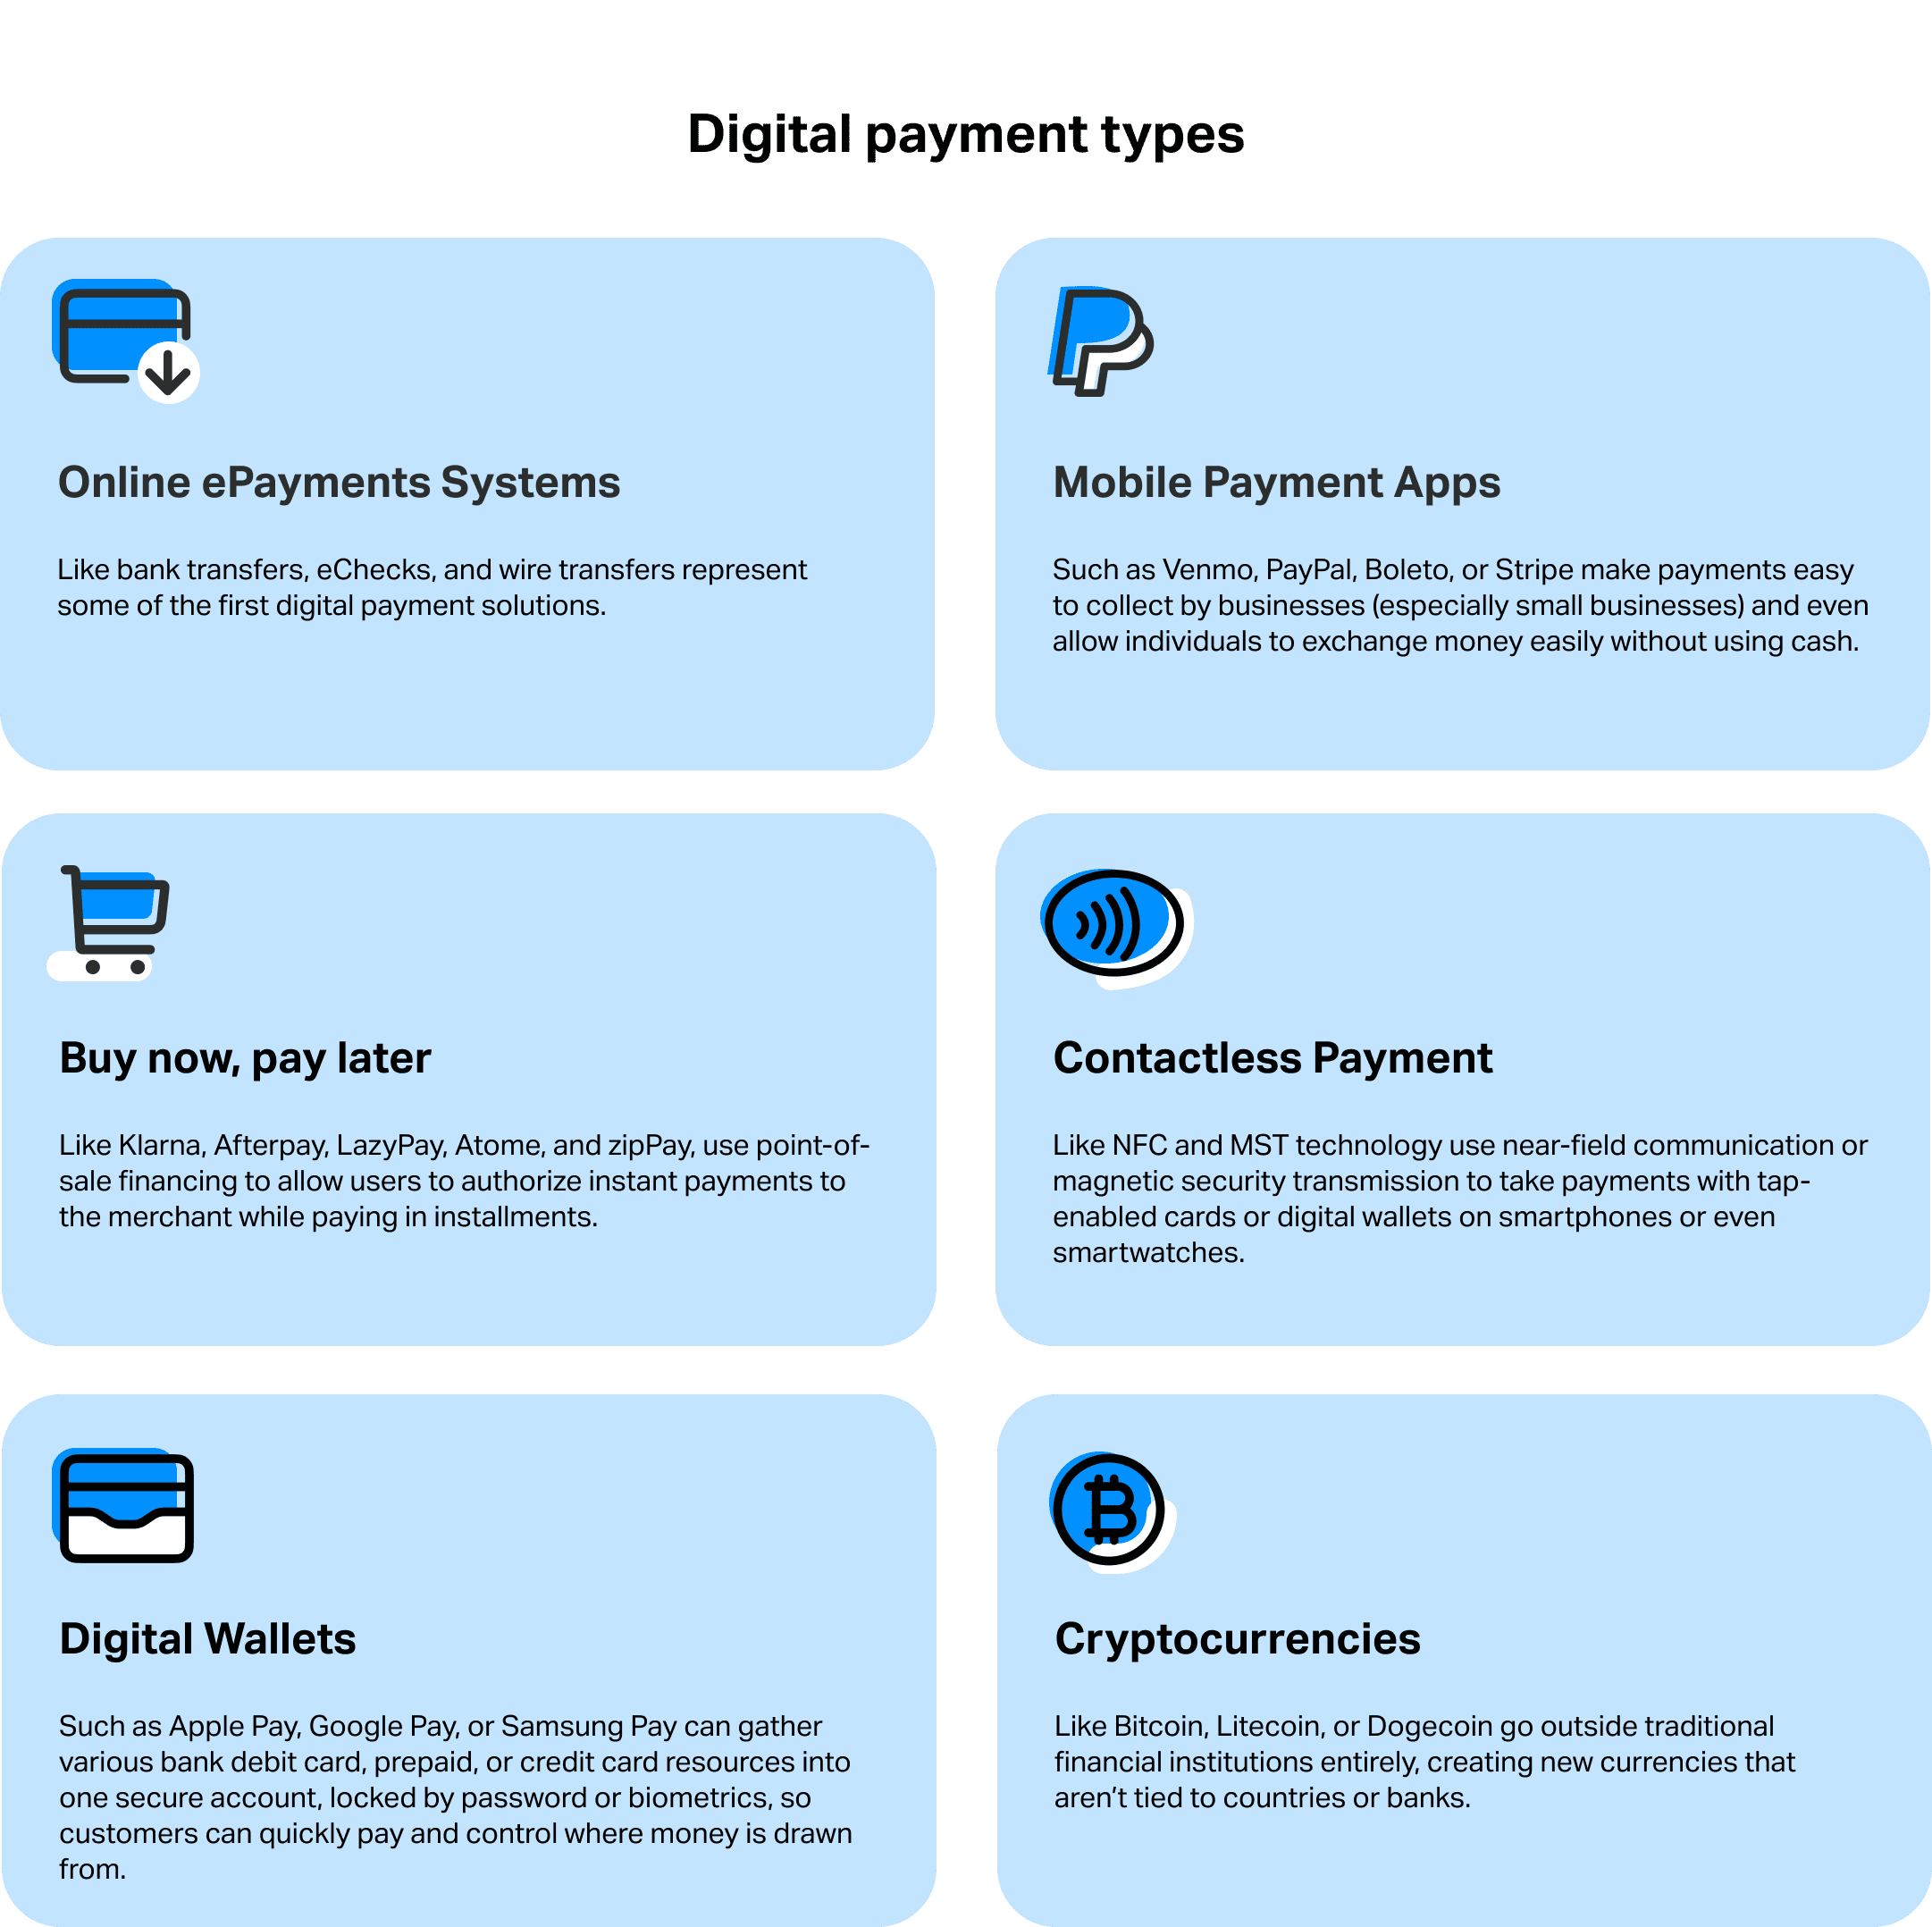 HOW TO: Payment System Security